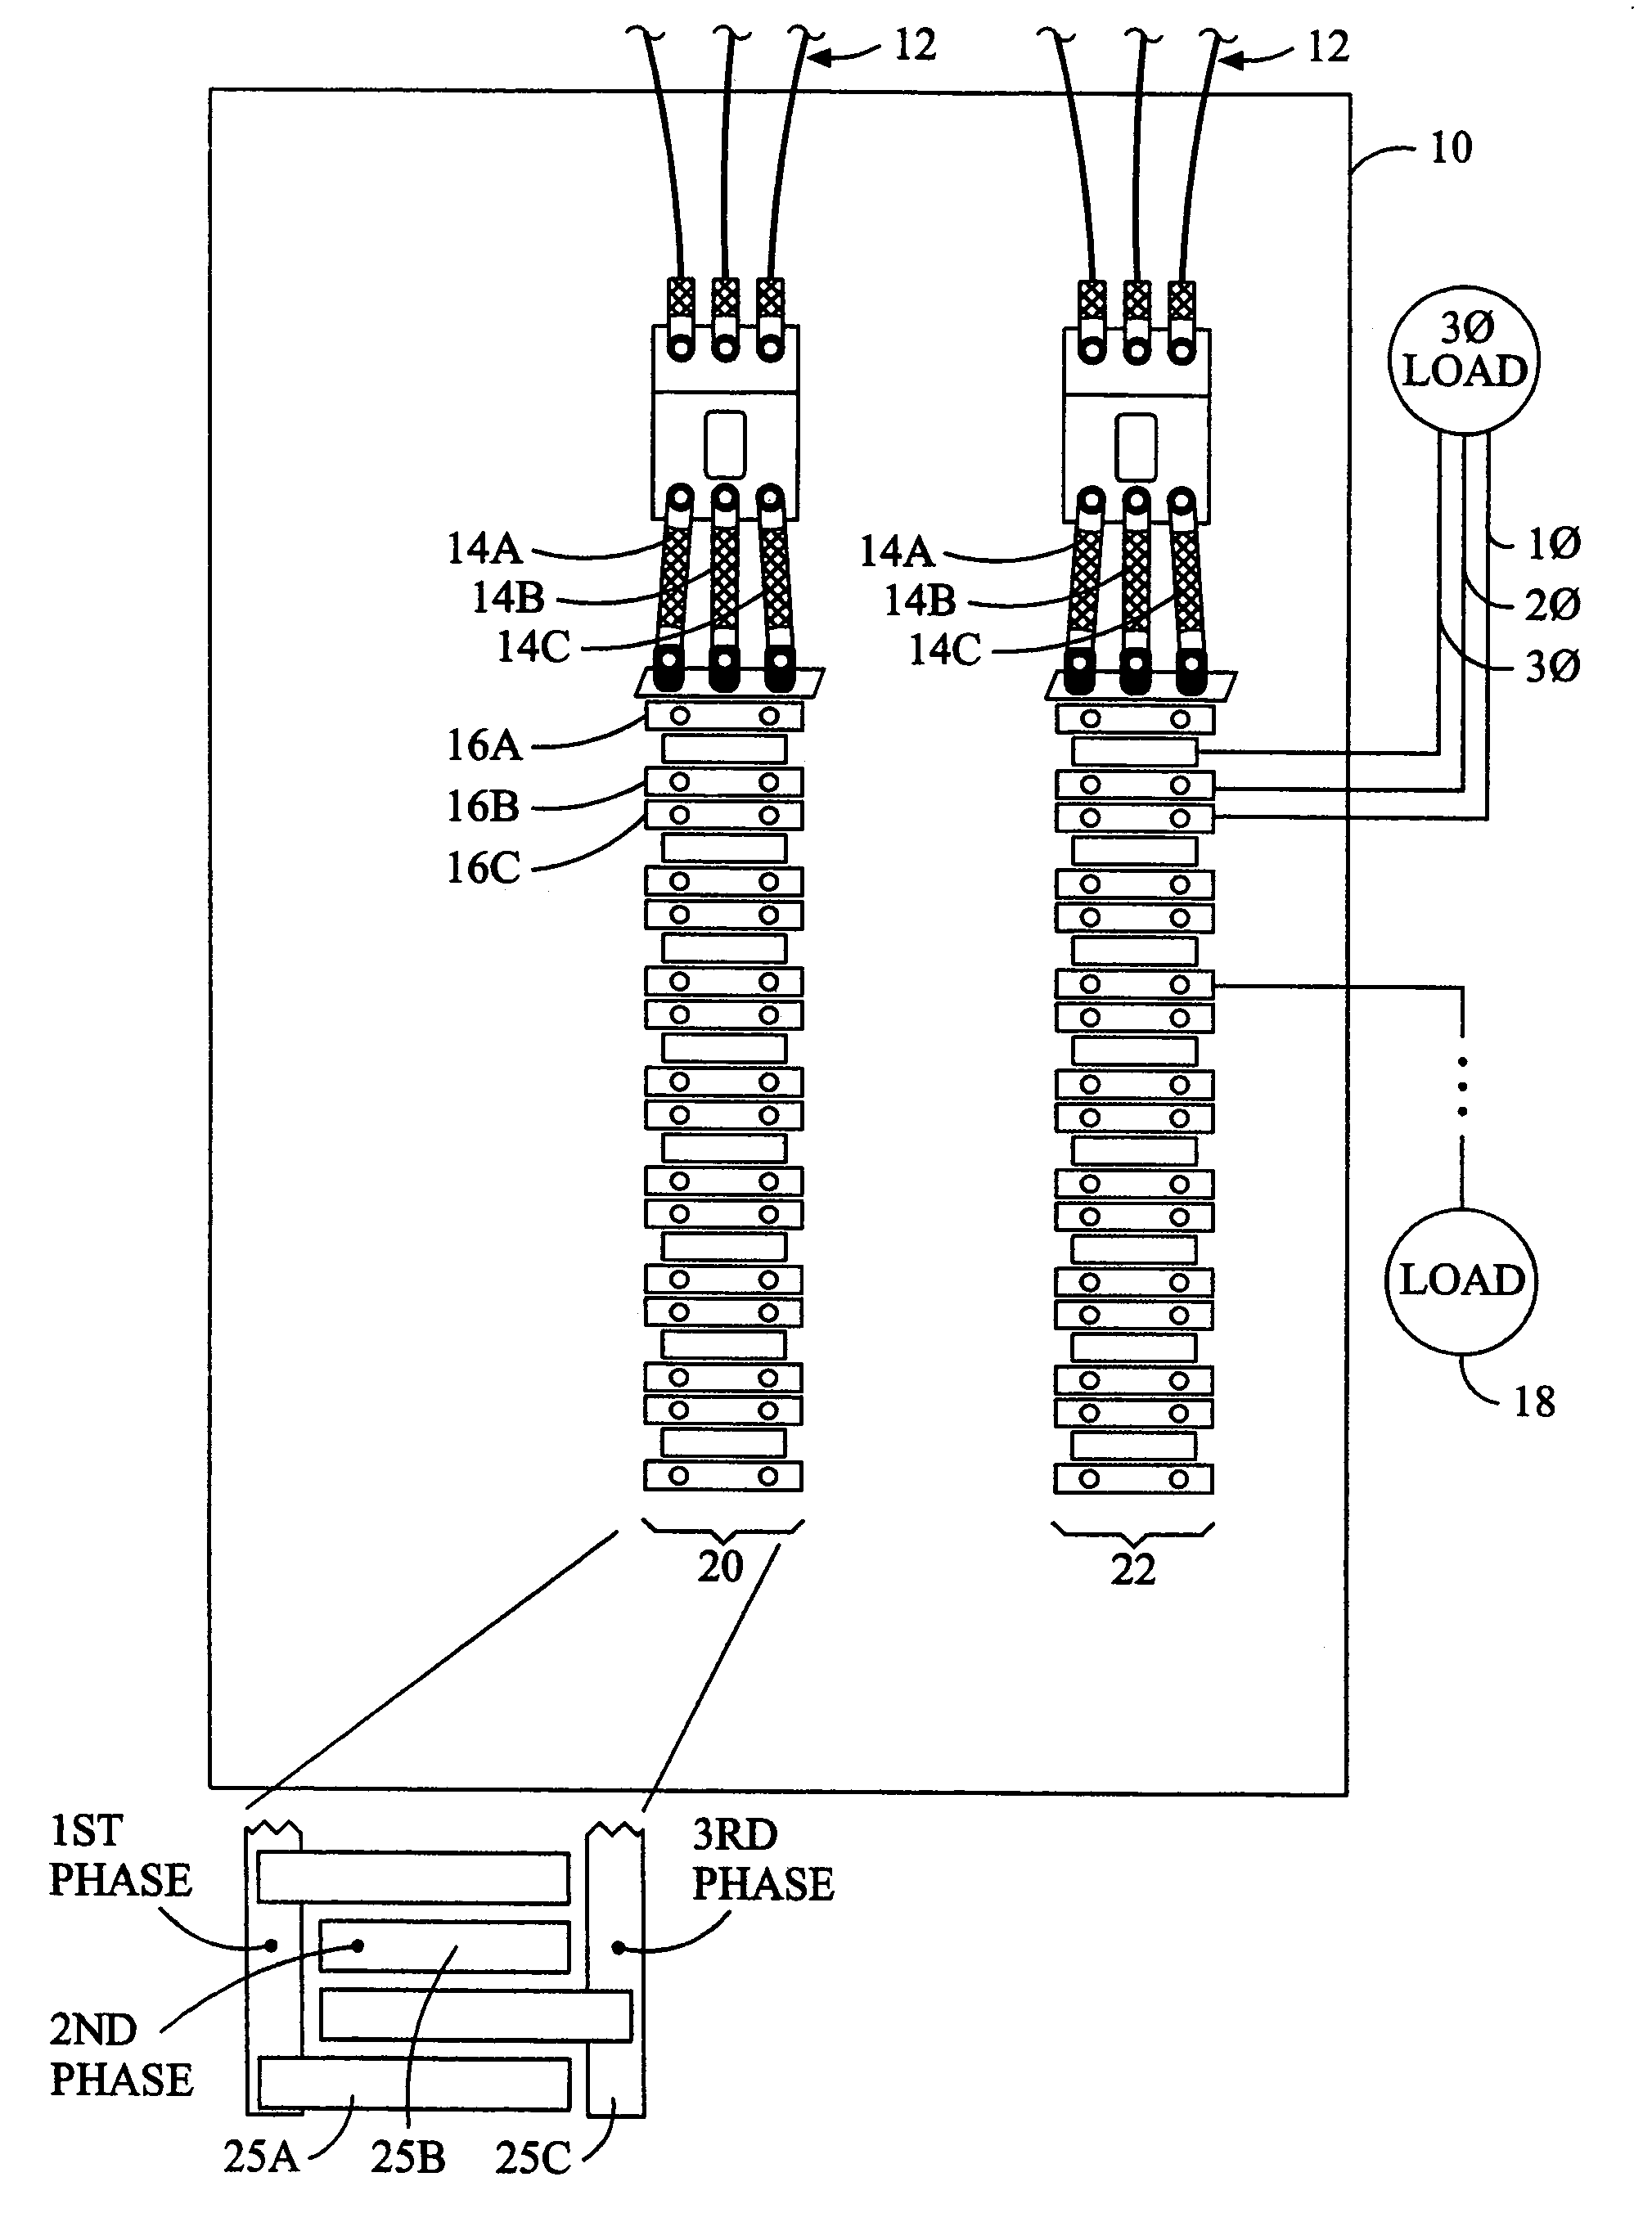 Power monitoring system that determines phase using a superimposed signal